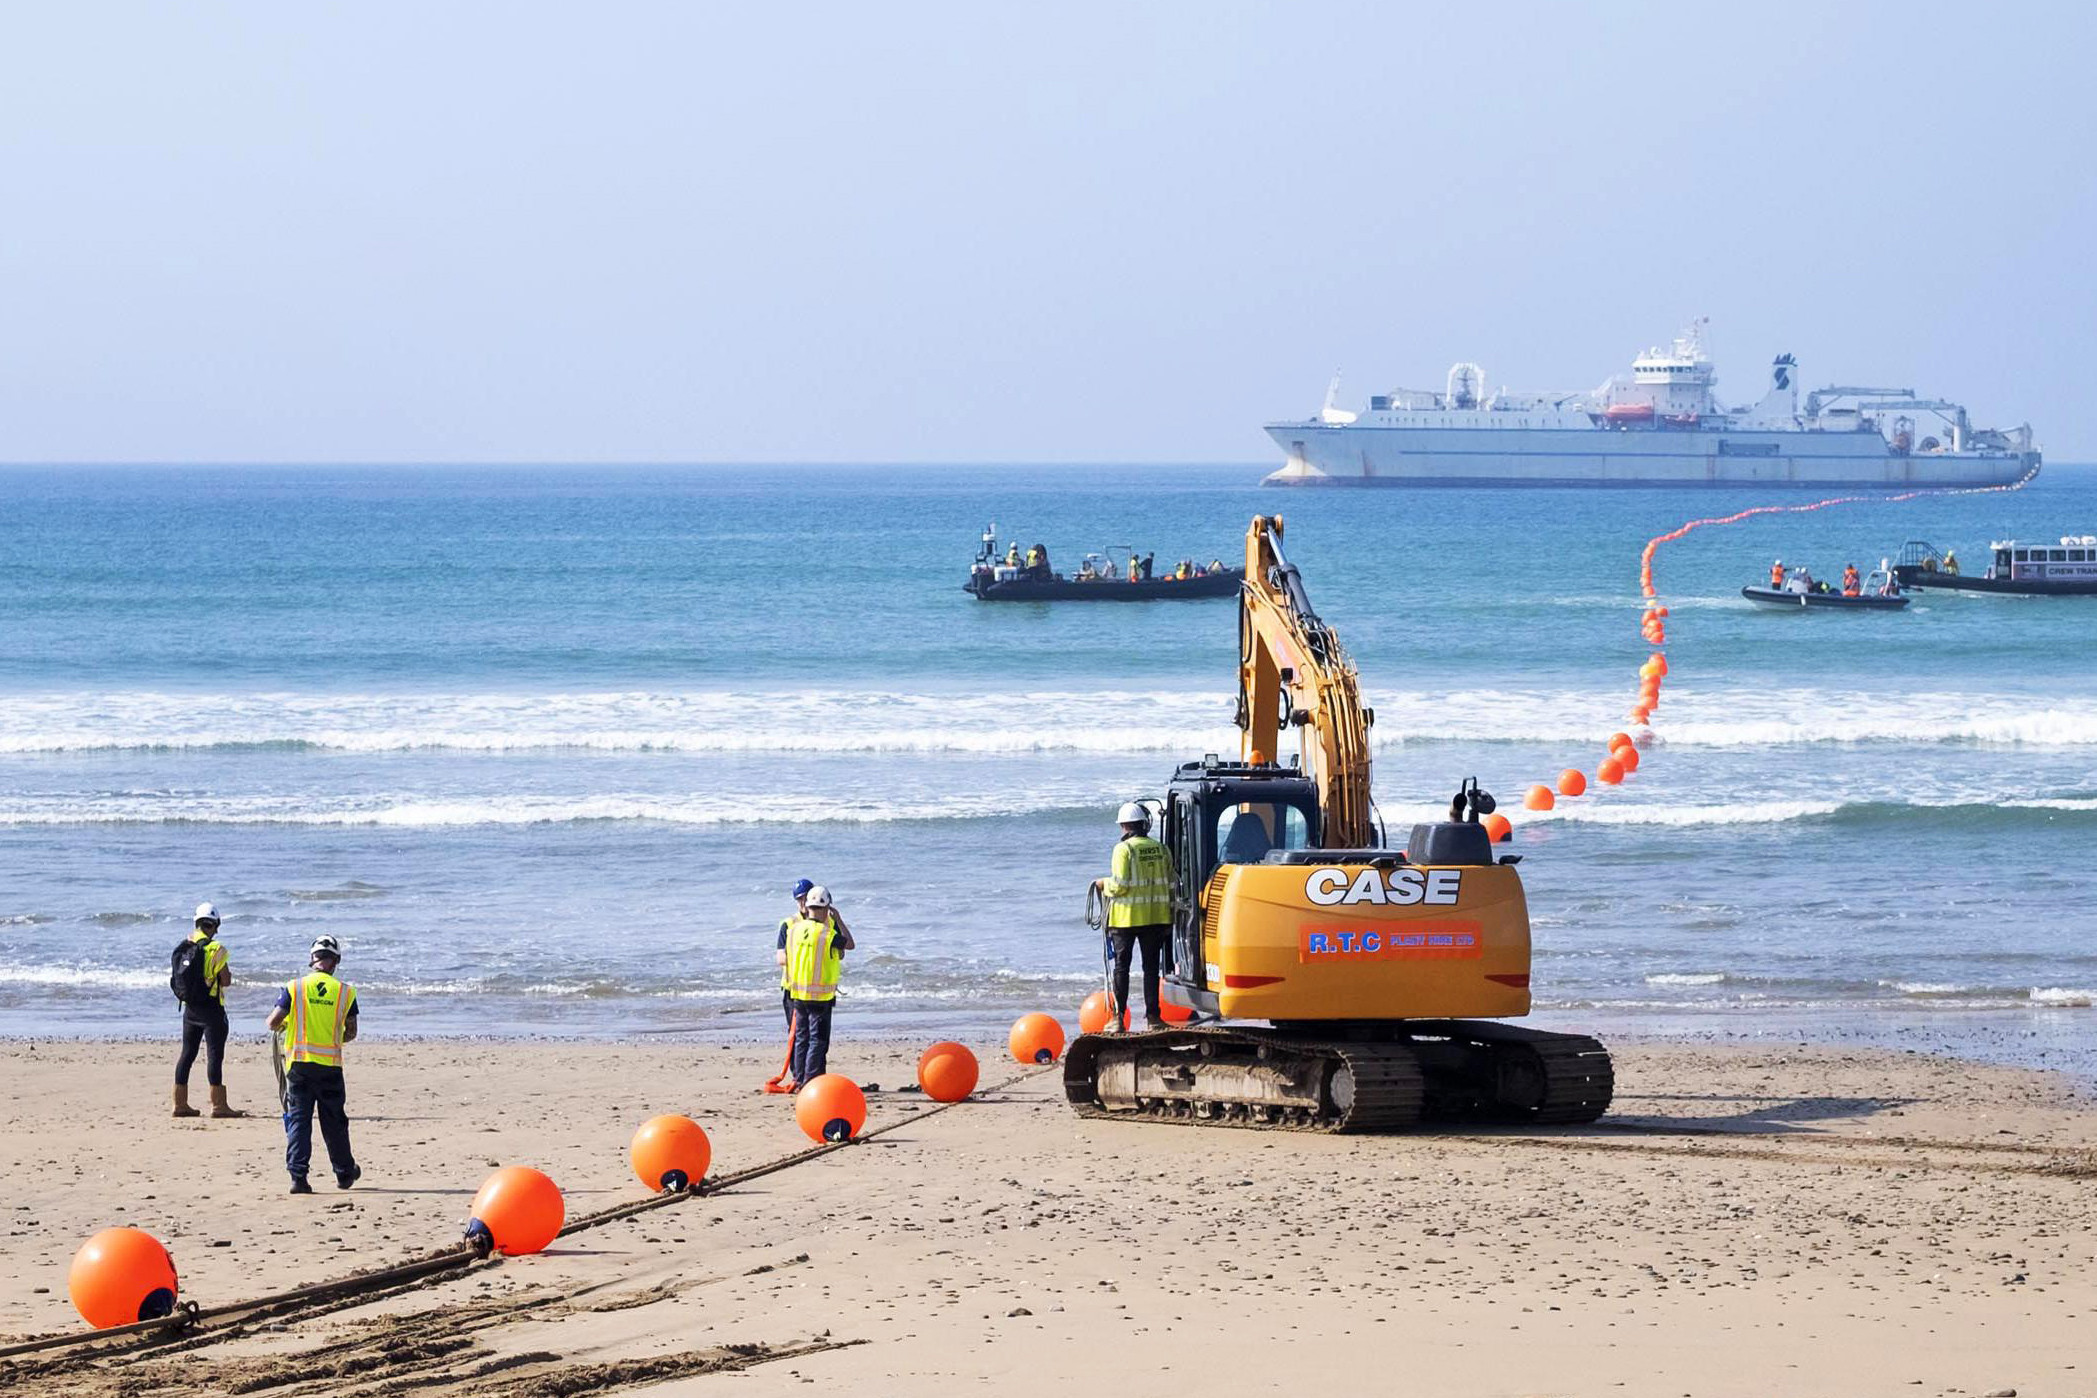 Problems of undersea fiber optic cables remain unresolved